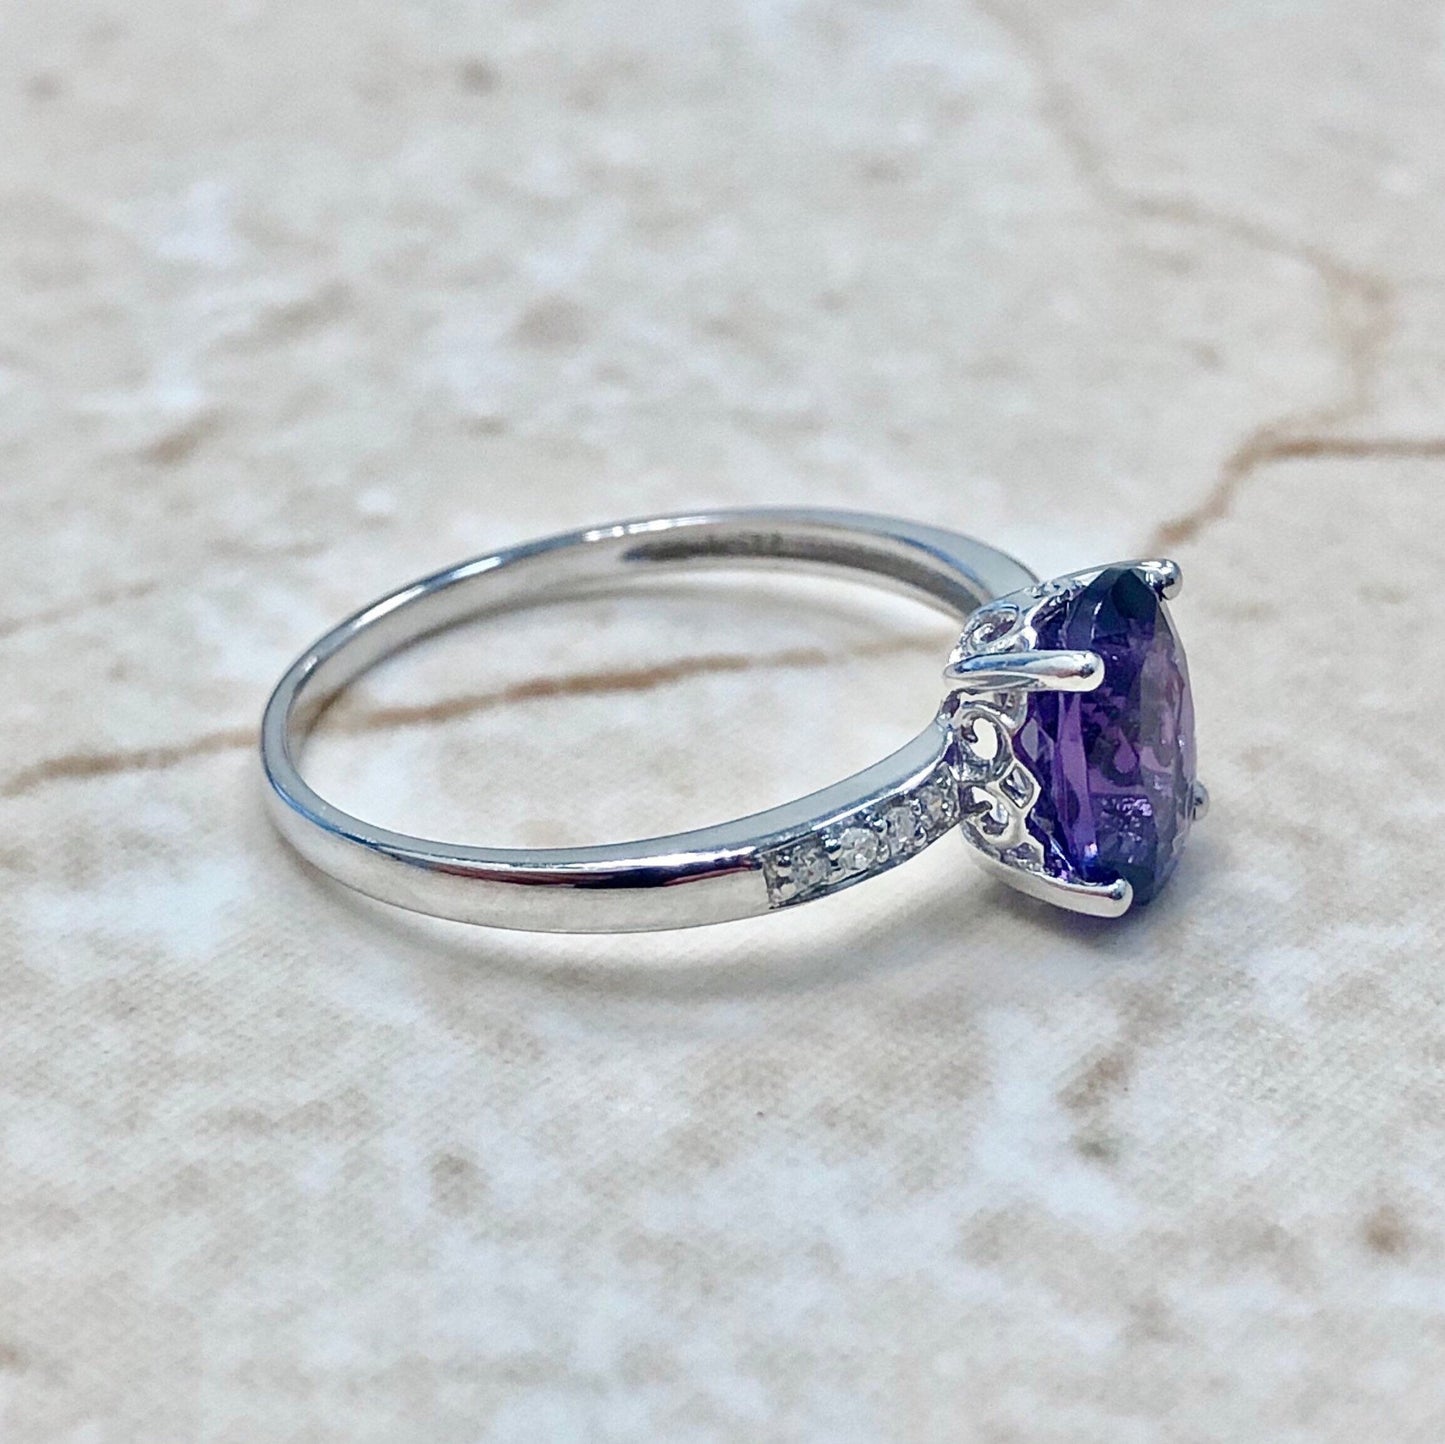 14K Oval Amethyst & Diamond Ring - White Gold Amethyst Solitaire Ring - February Birthstone - Birthday Gift - Best Gift For Her - On Sale